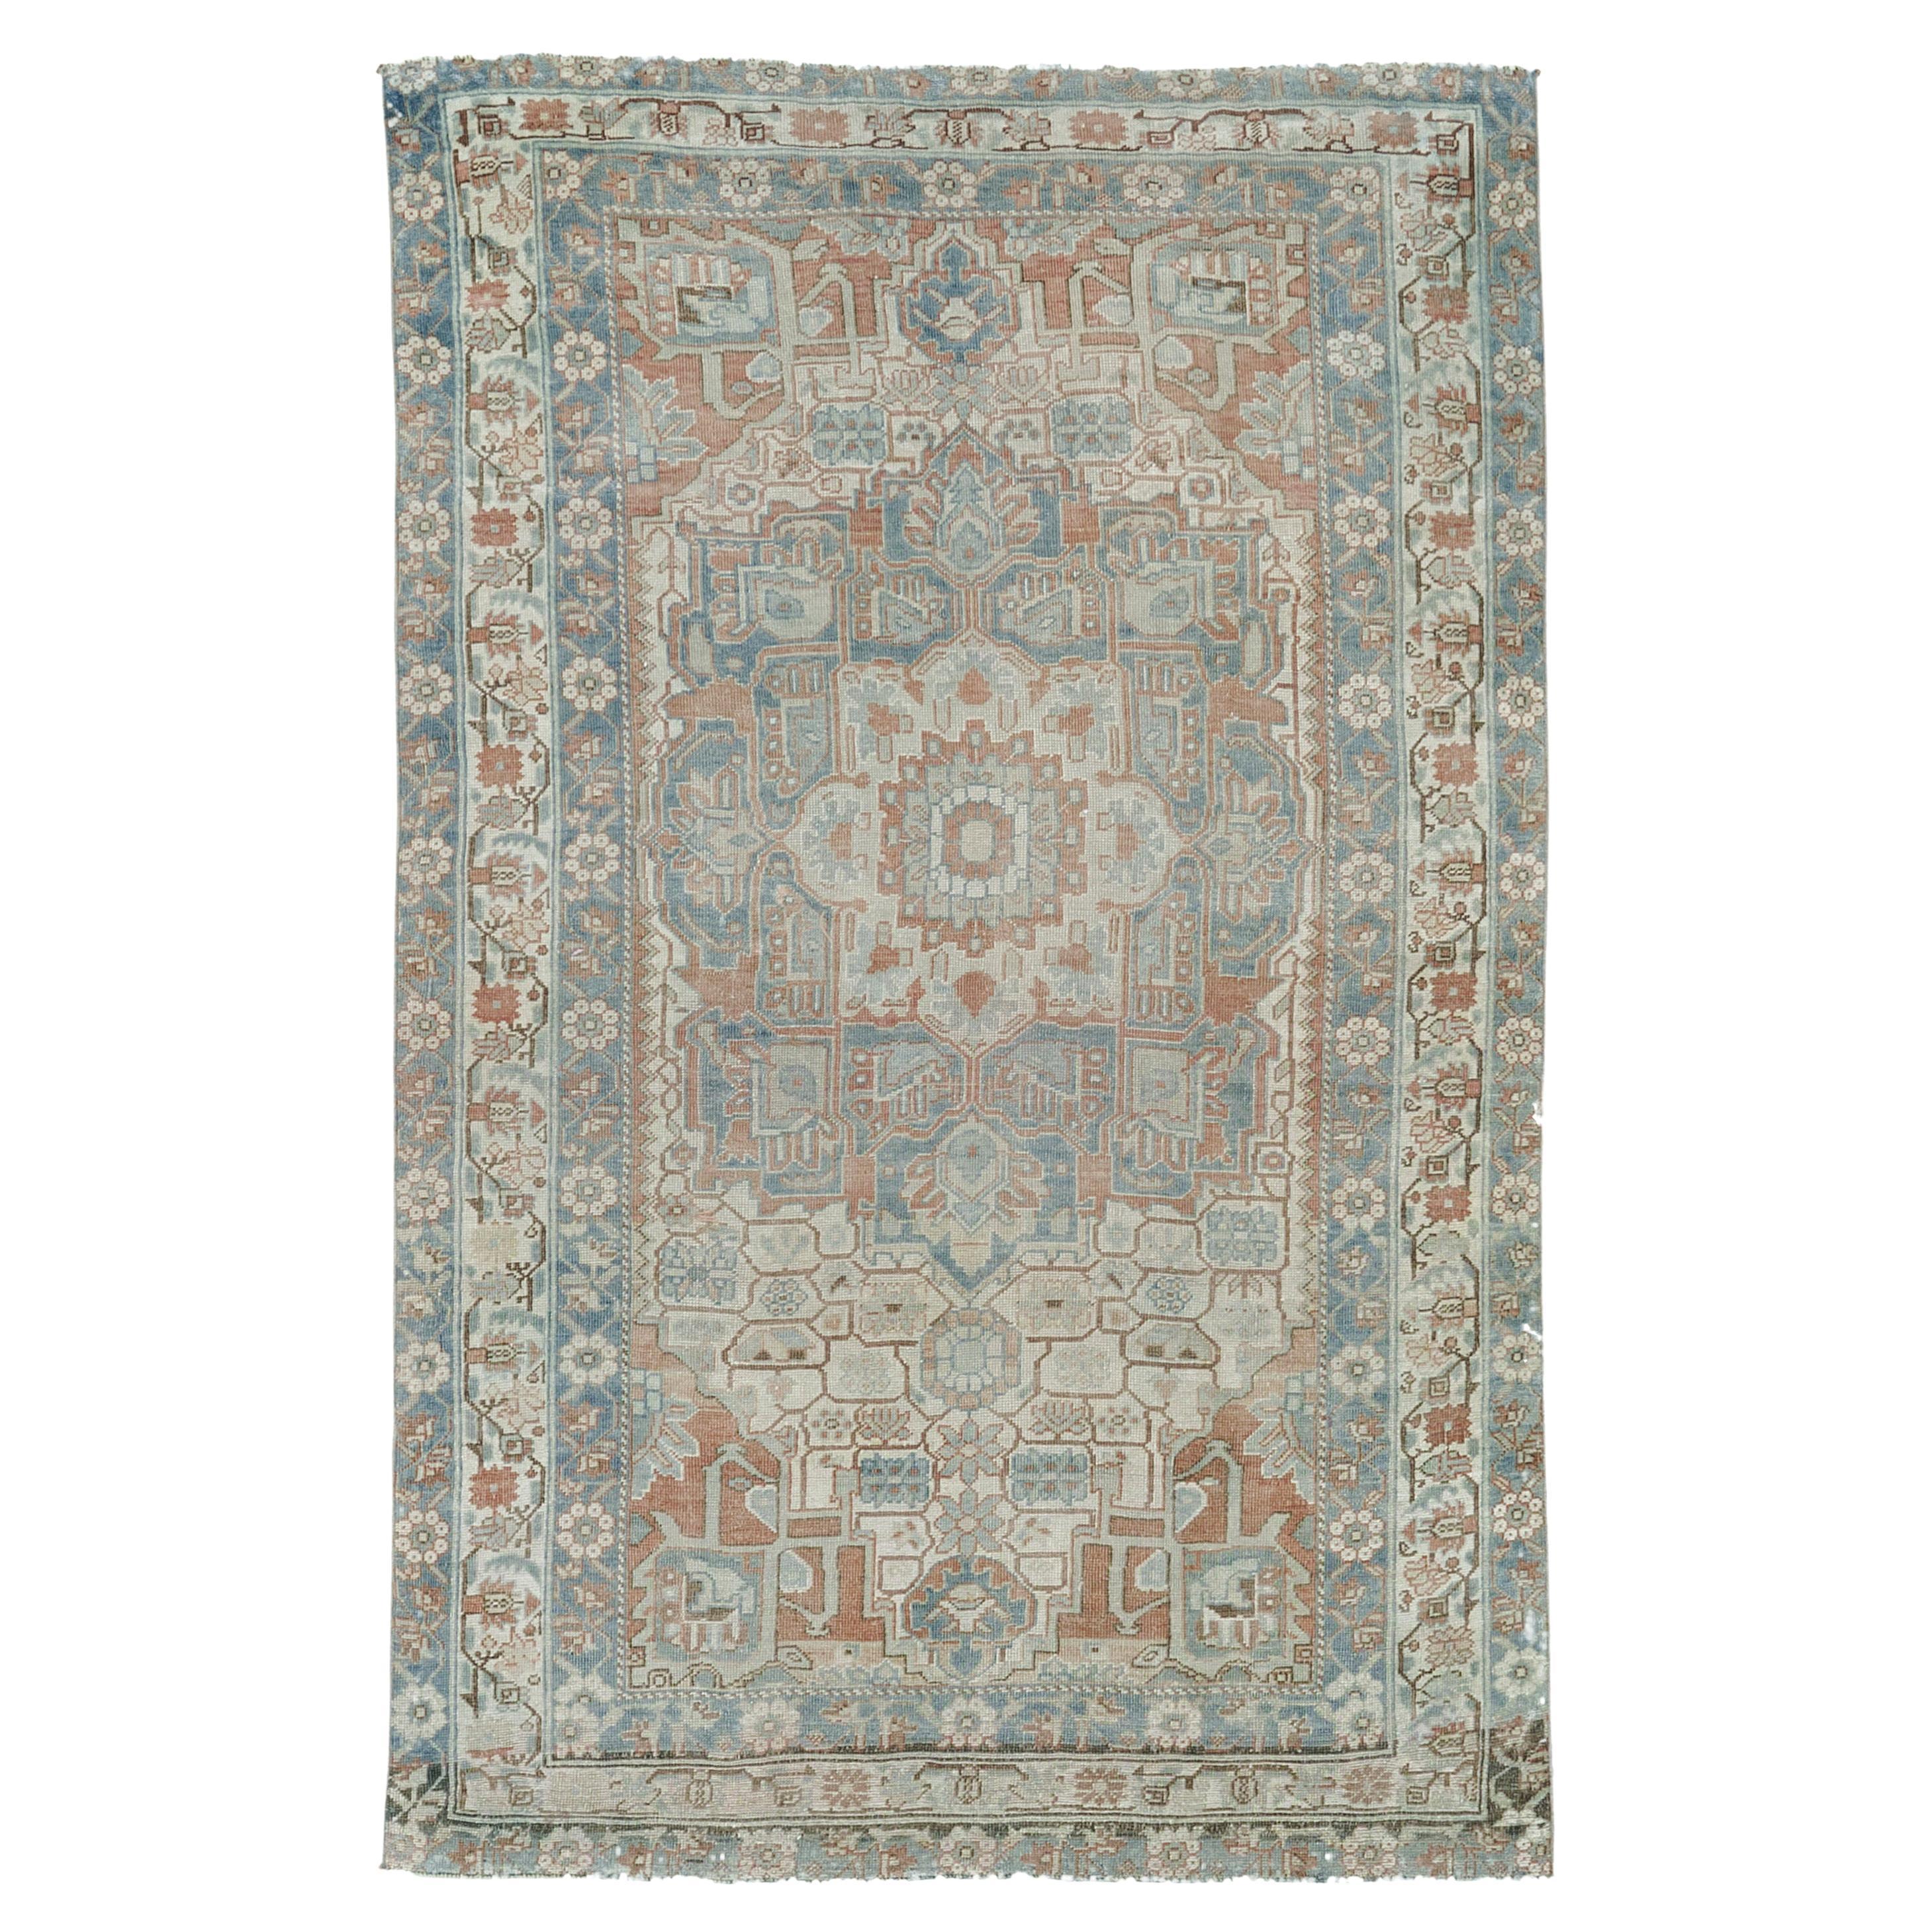 Antique Persian Afshar by Mehraban Rugs